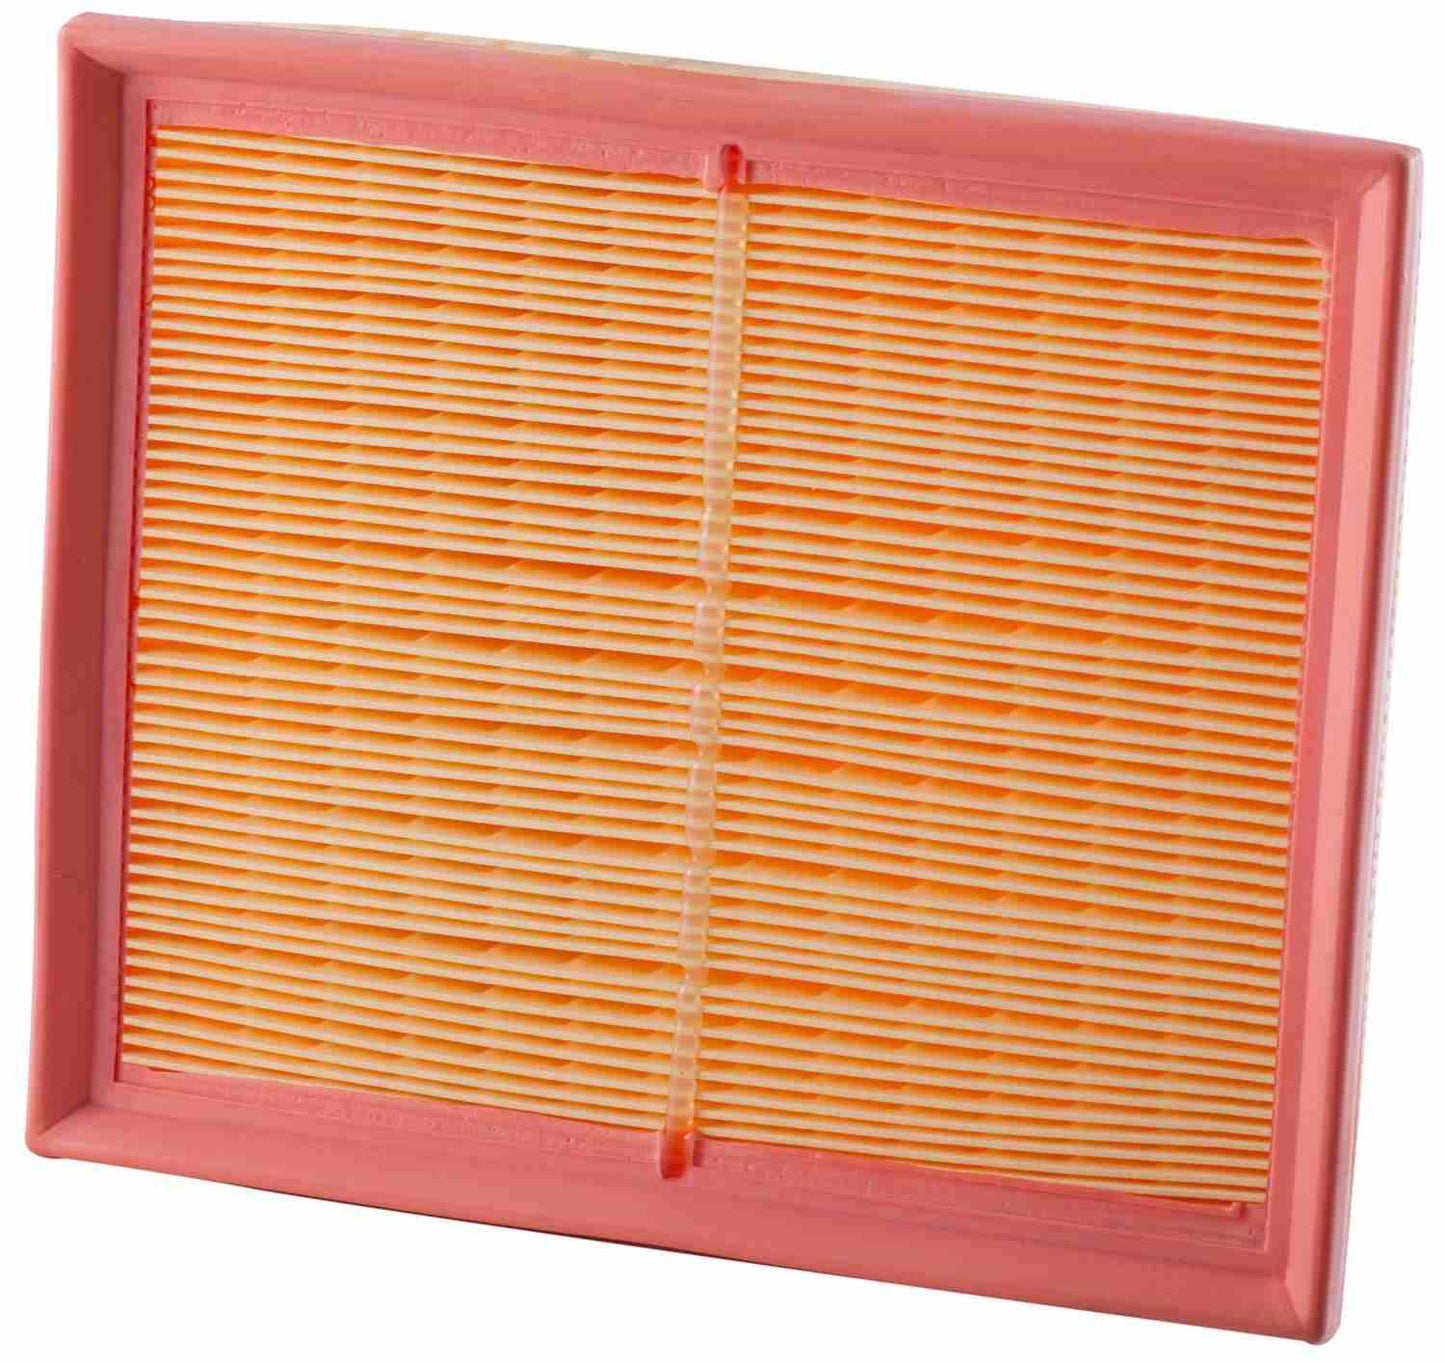 Back View of Air Filter PRONTO PA5406